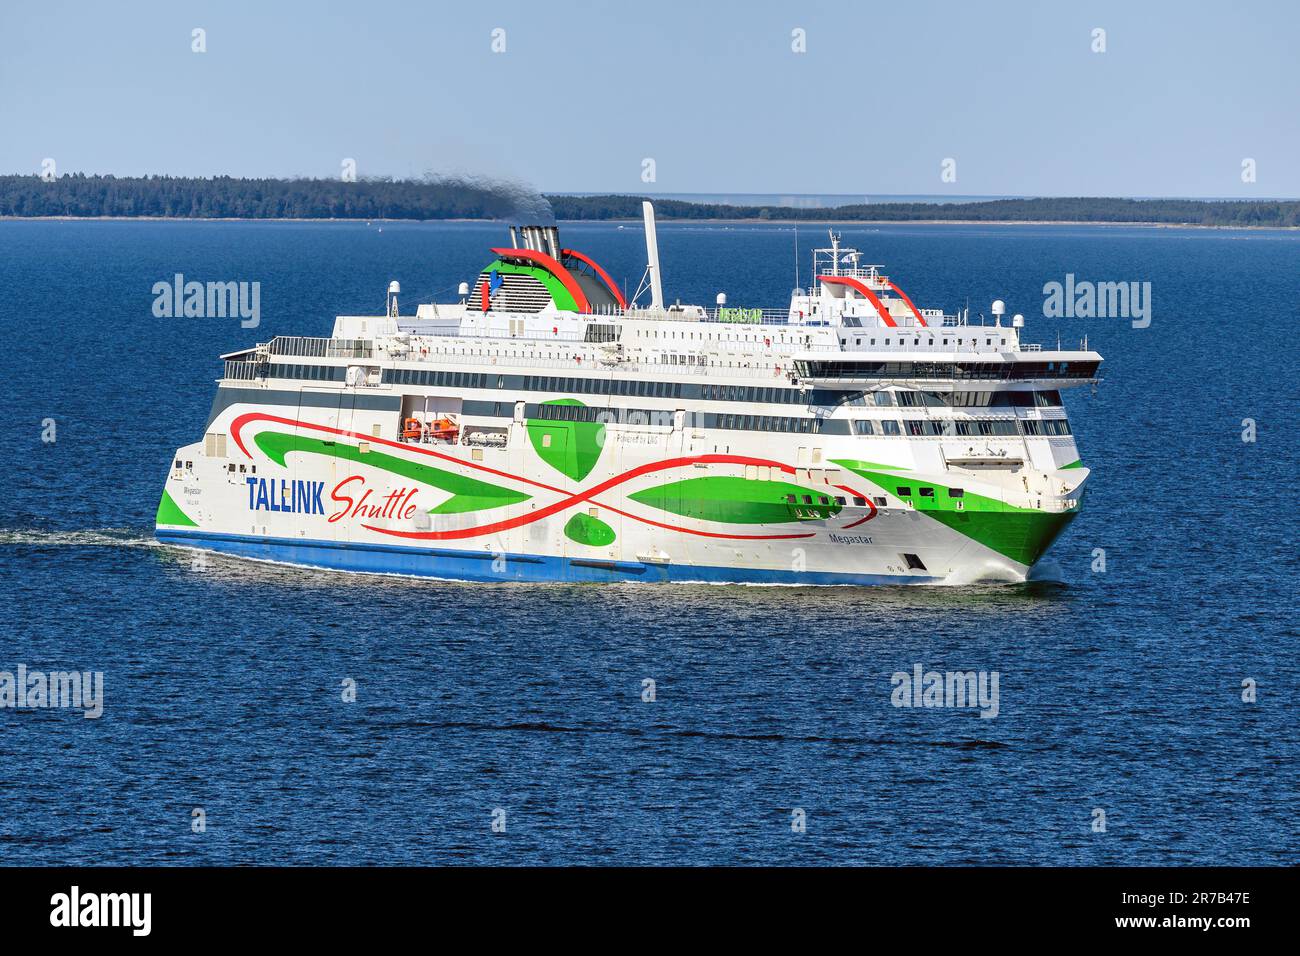 Megastar is an LNG-powered ferry operated by the Estonia ferry company Tallink on their ‘Shuttle’ service between Tallinn and Helsinki. Stock Photo